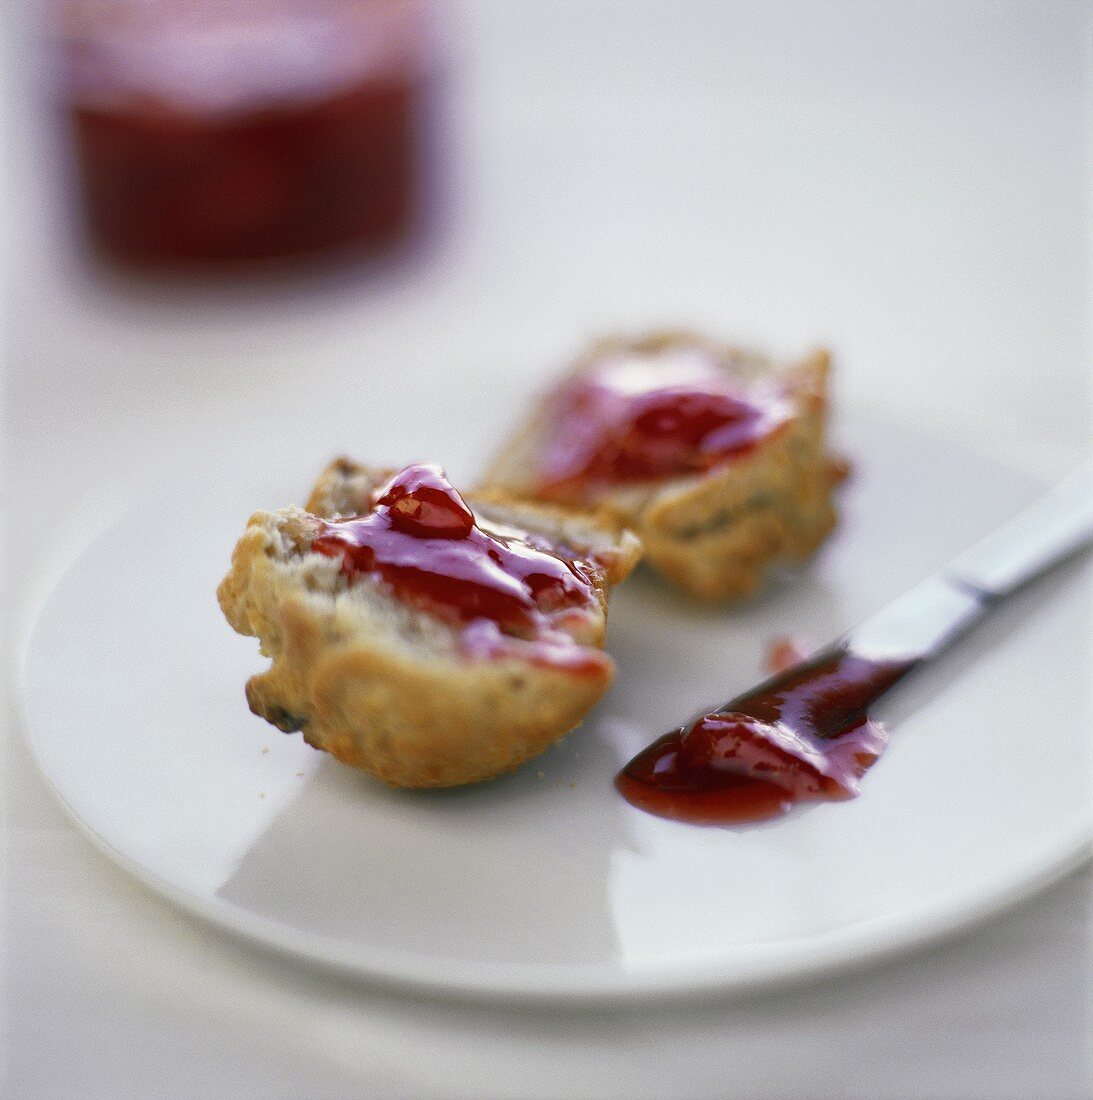 Scones with strawberry and cardamom jam